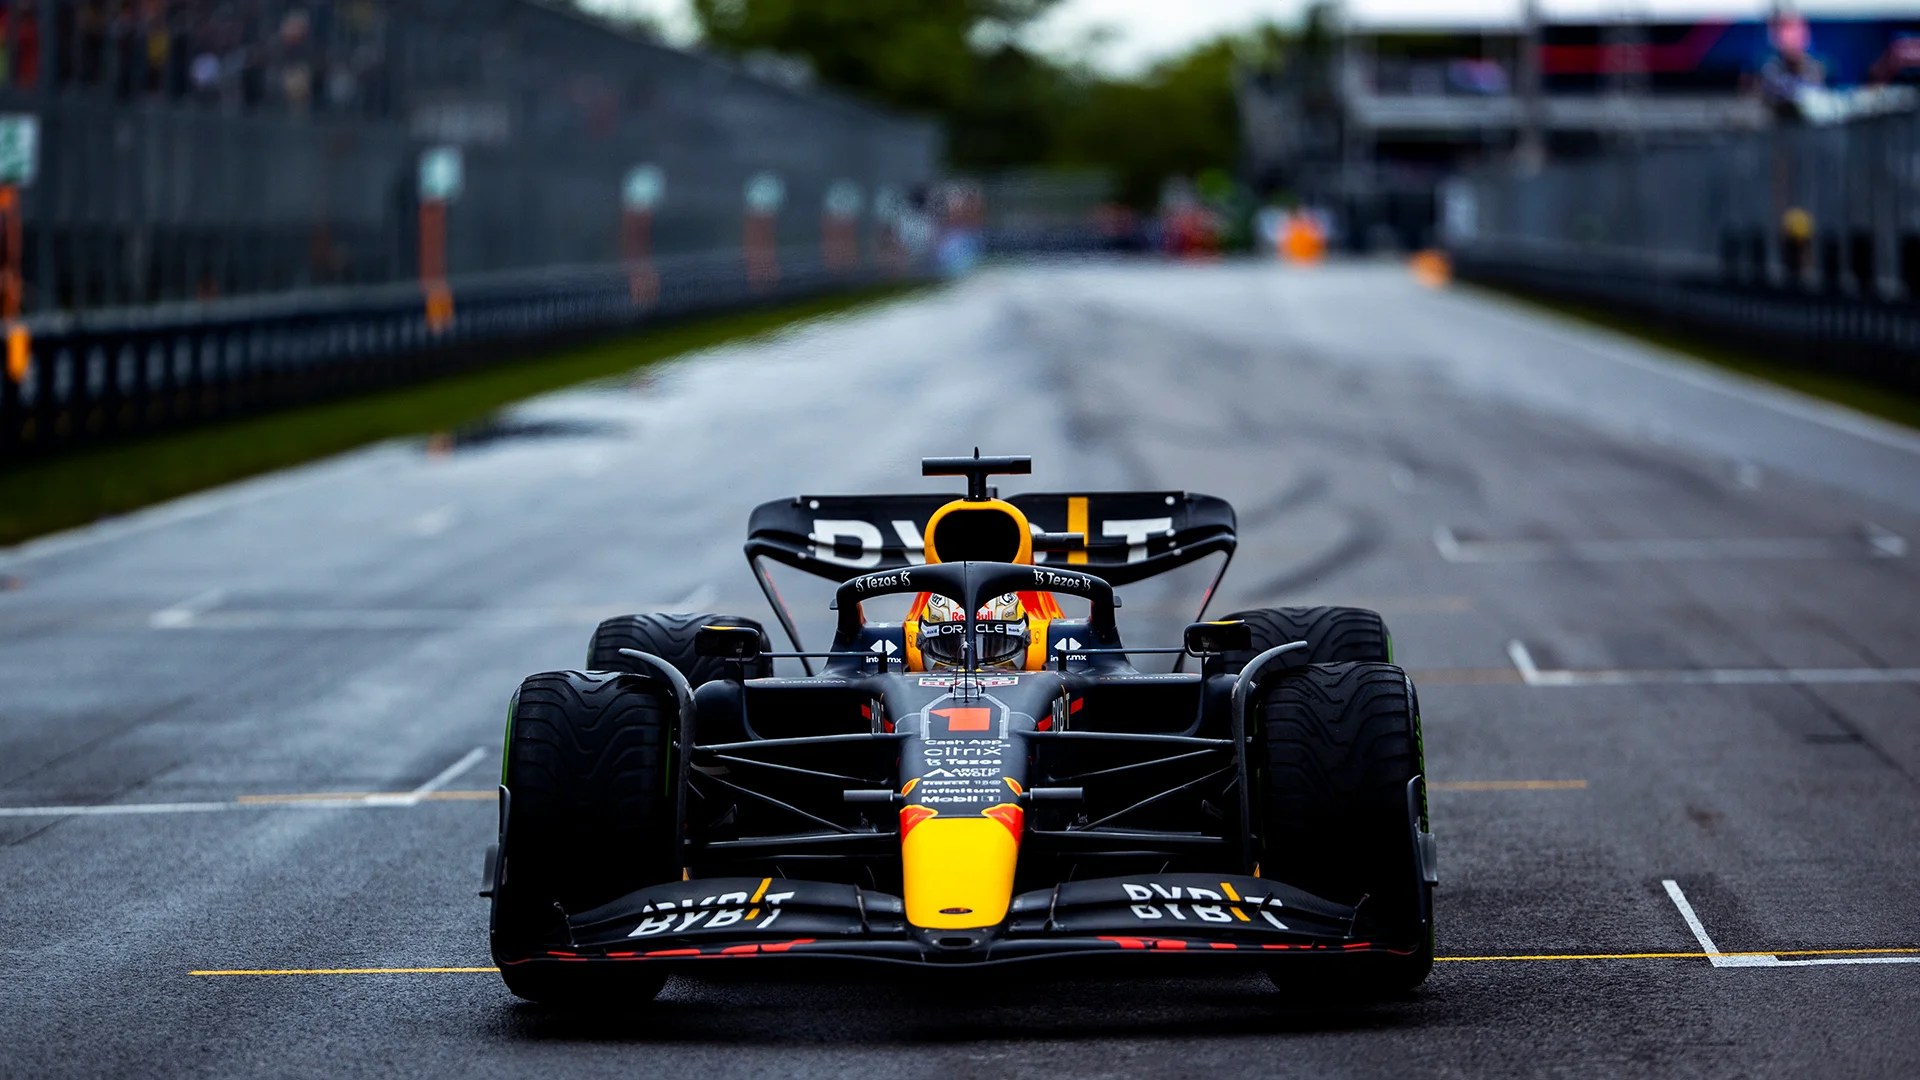 F1 Constructors Championship: Red Bull EXTENDS lead over Ferrari, Mercedes holds huge lead over McLaren in 3rd spot - Check standings